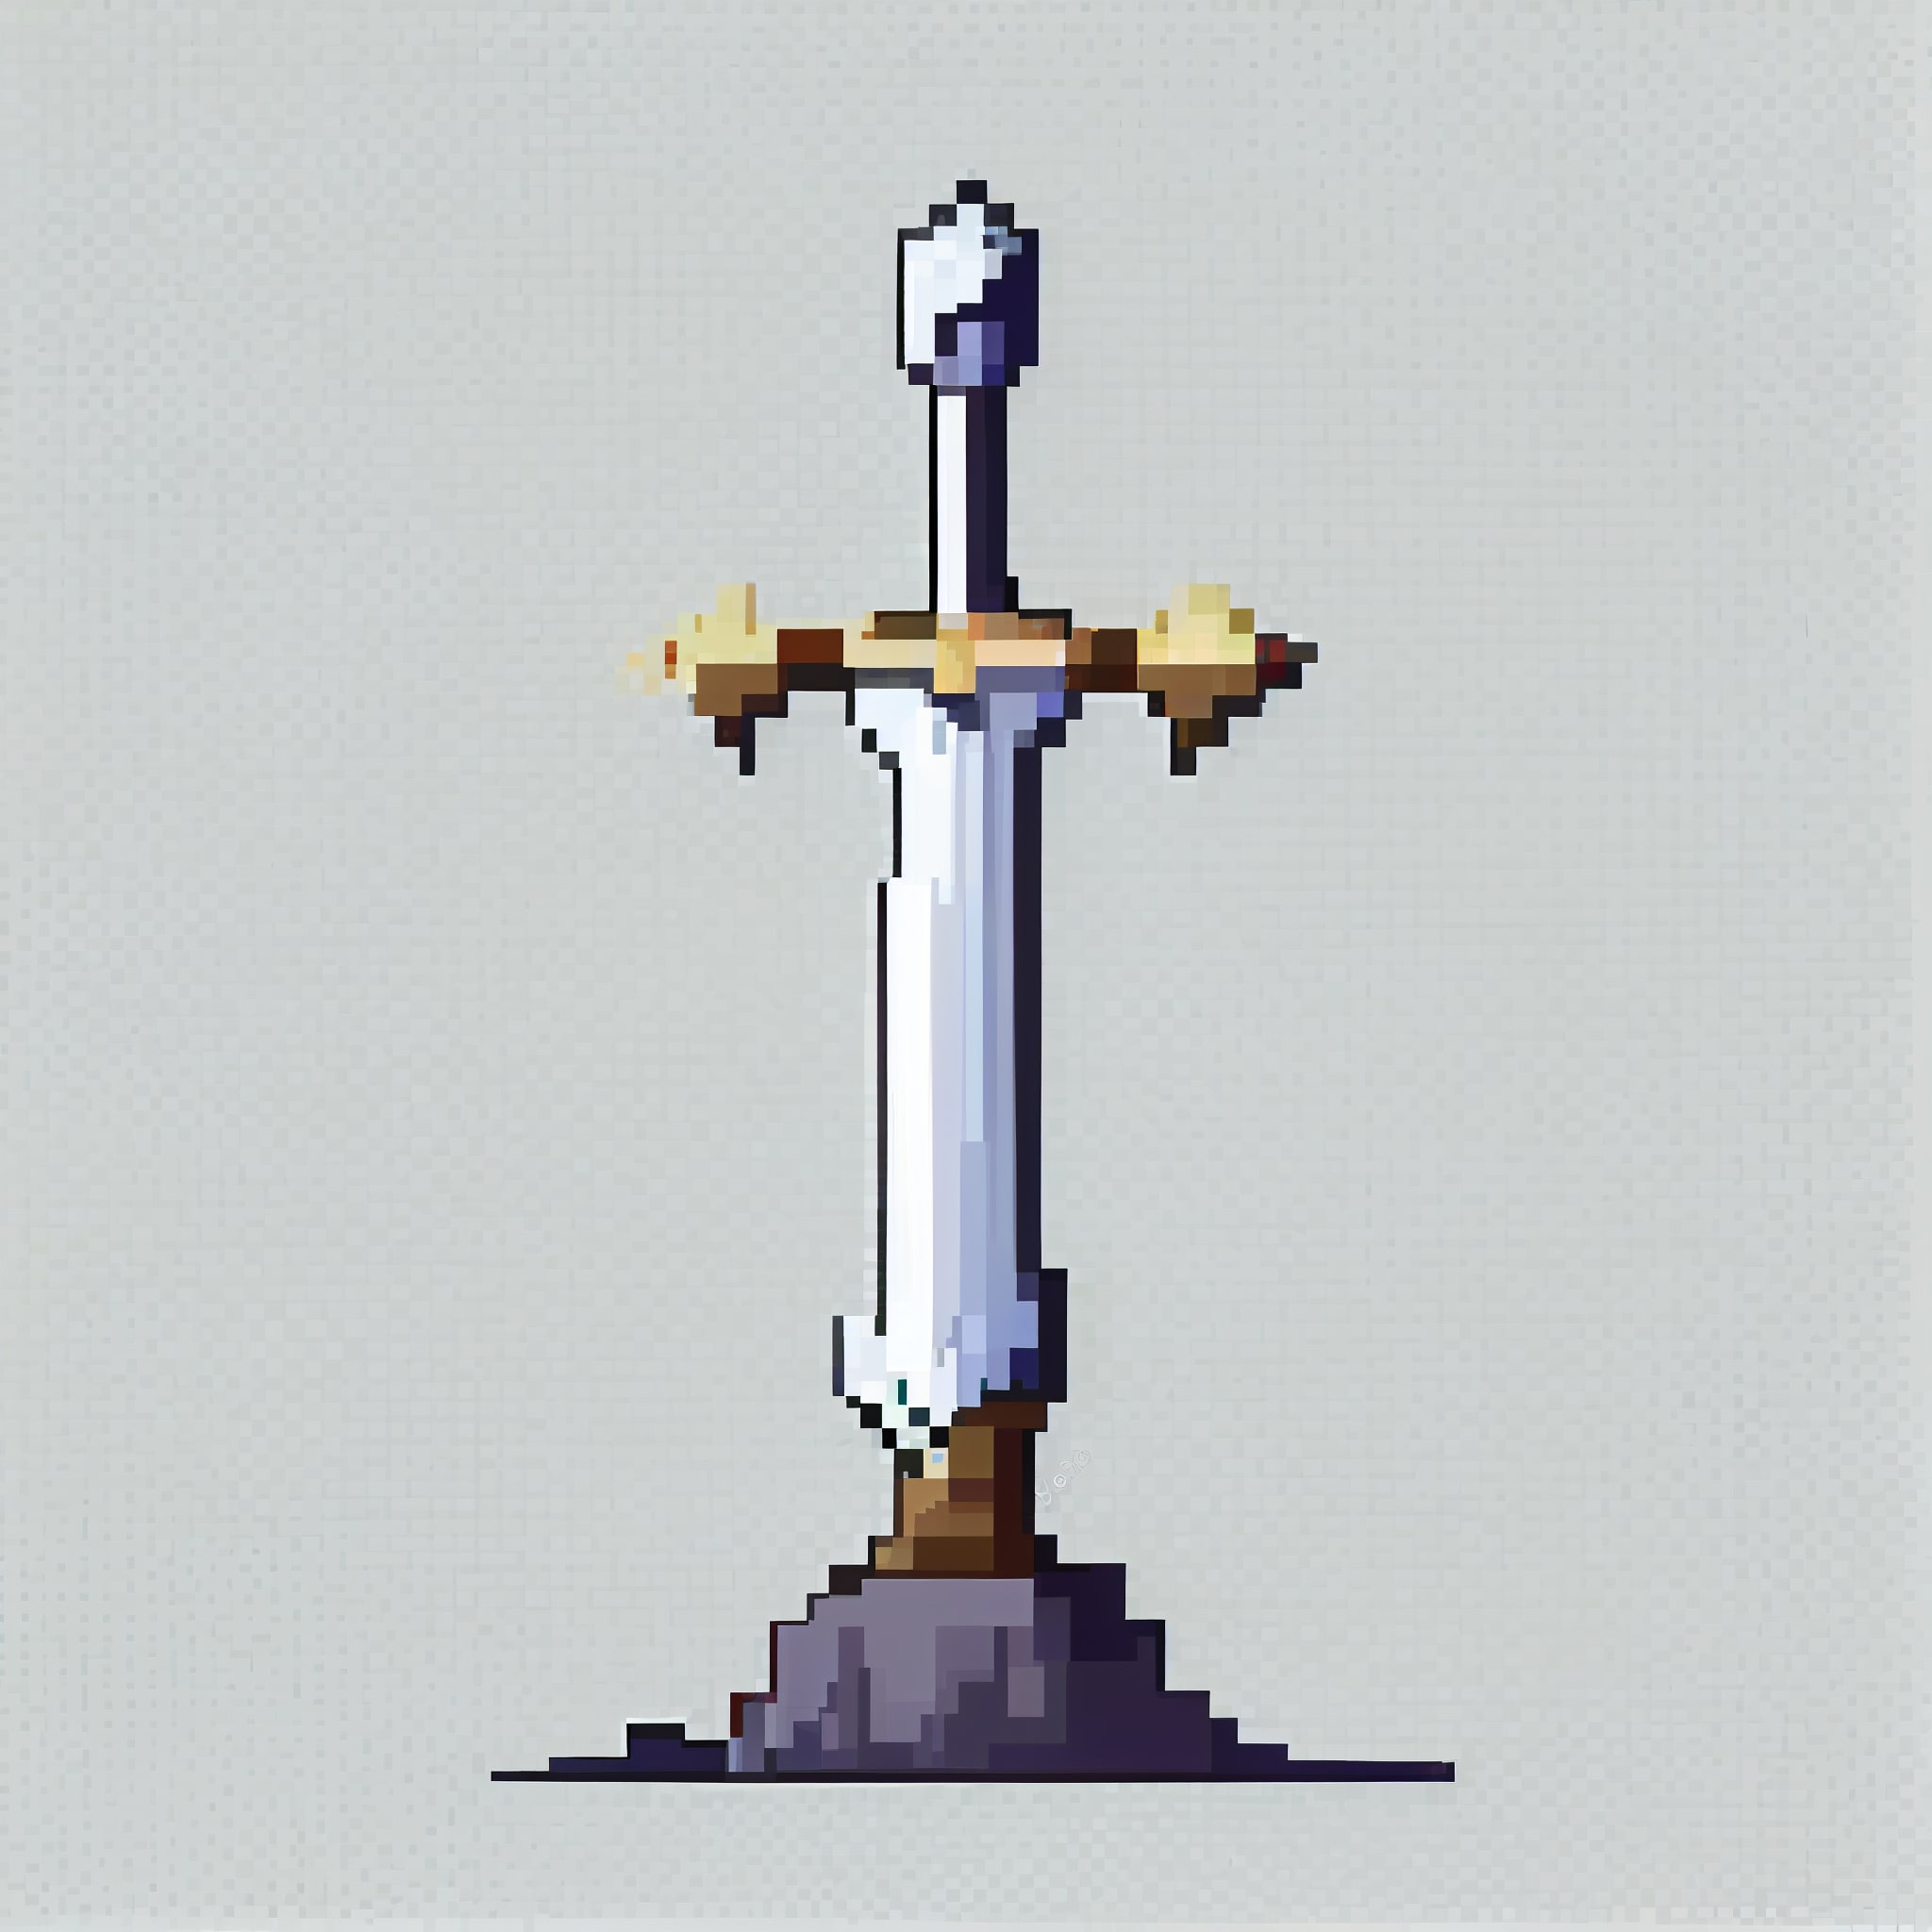 Pixelated sword with two swords on top of it.